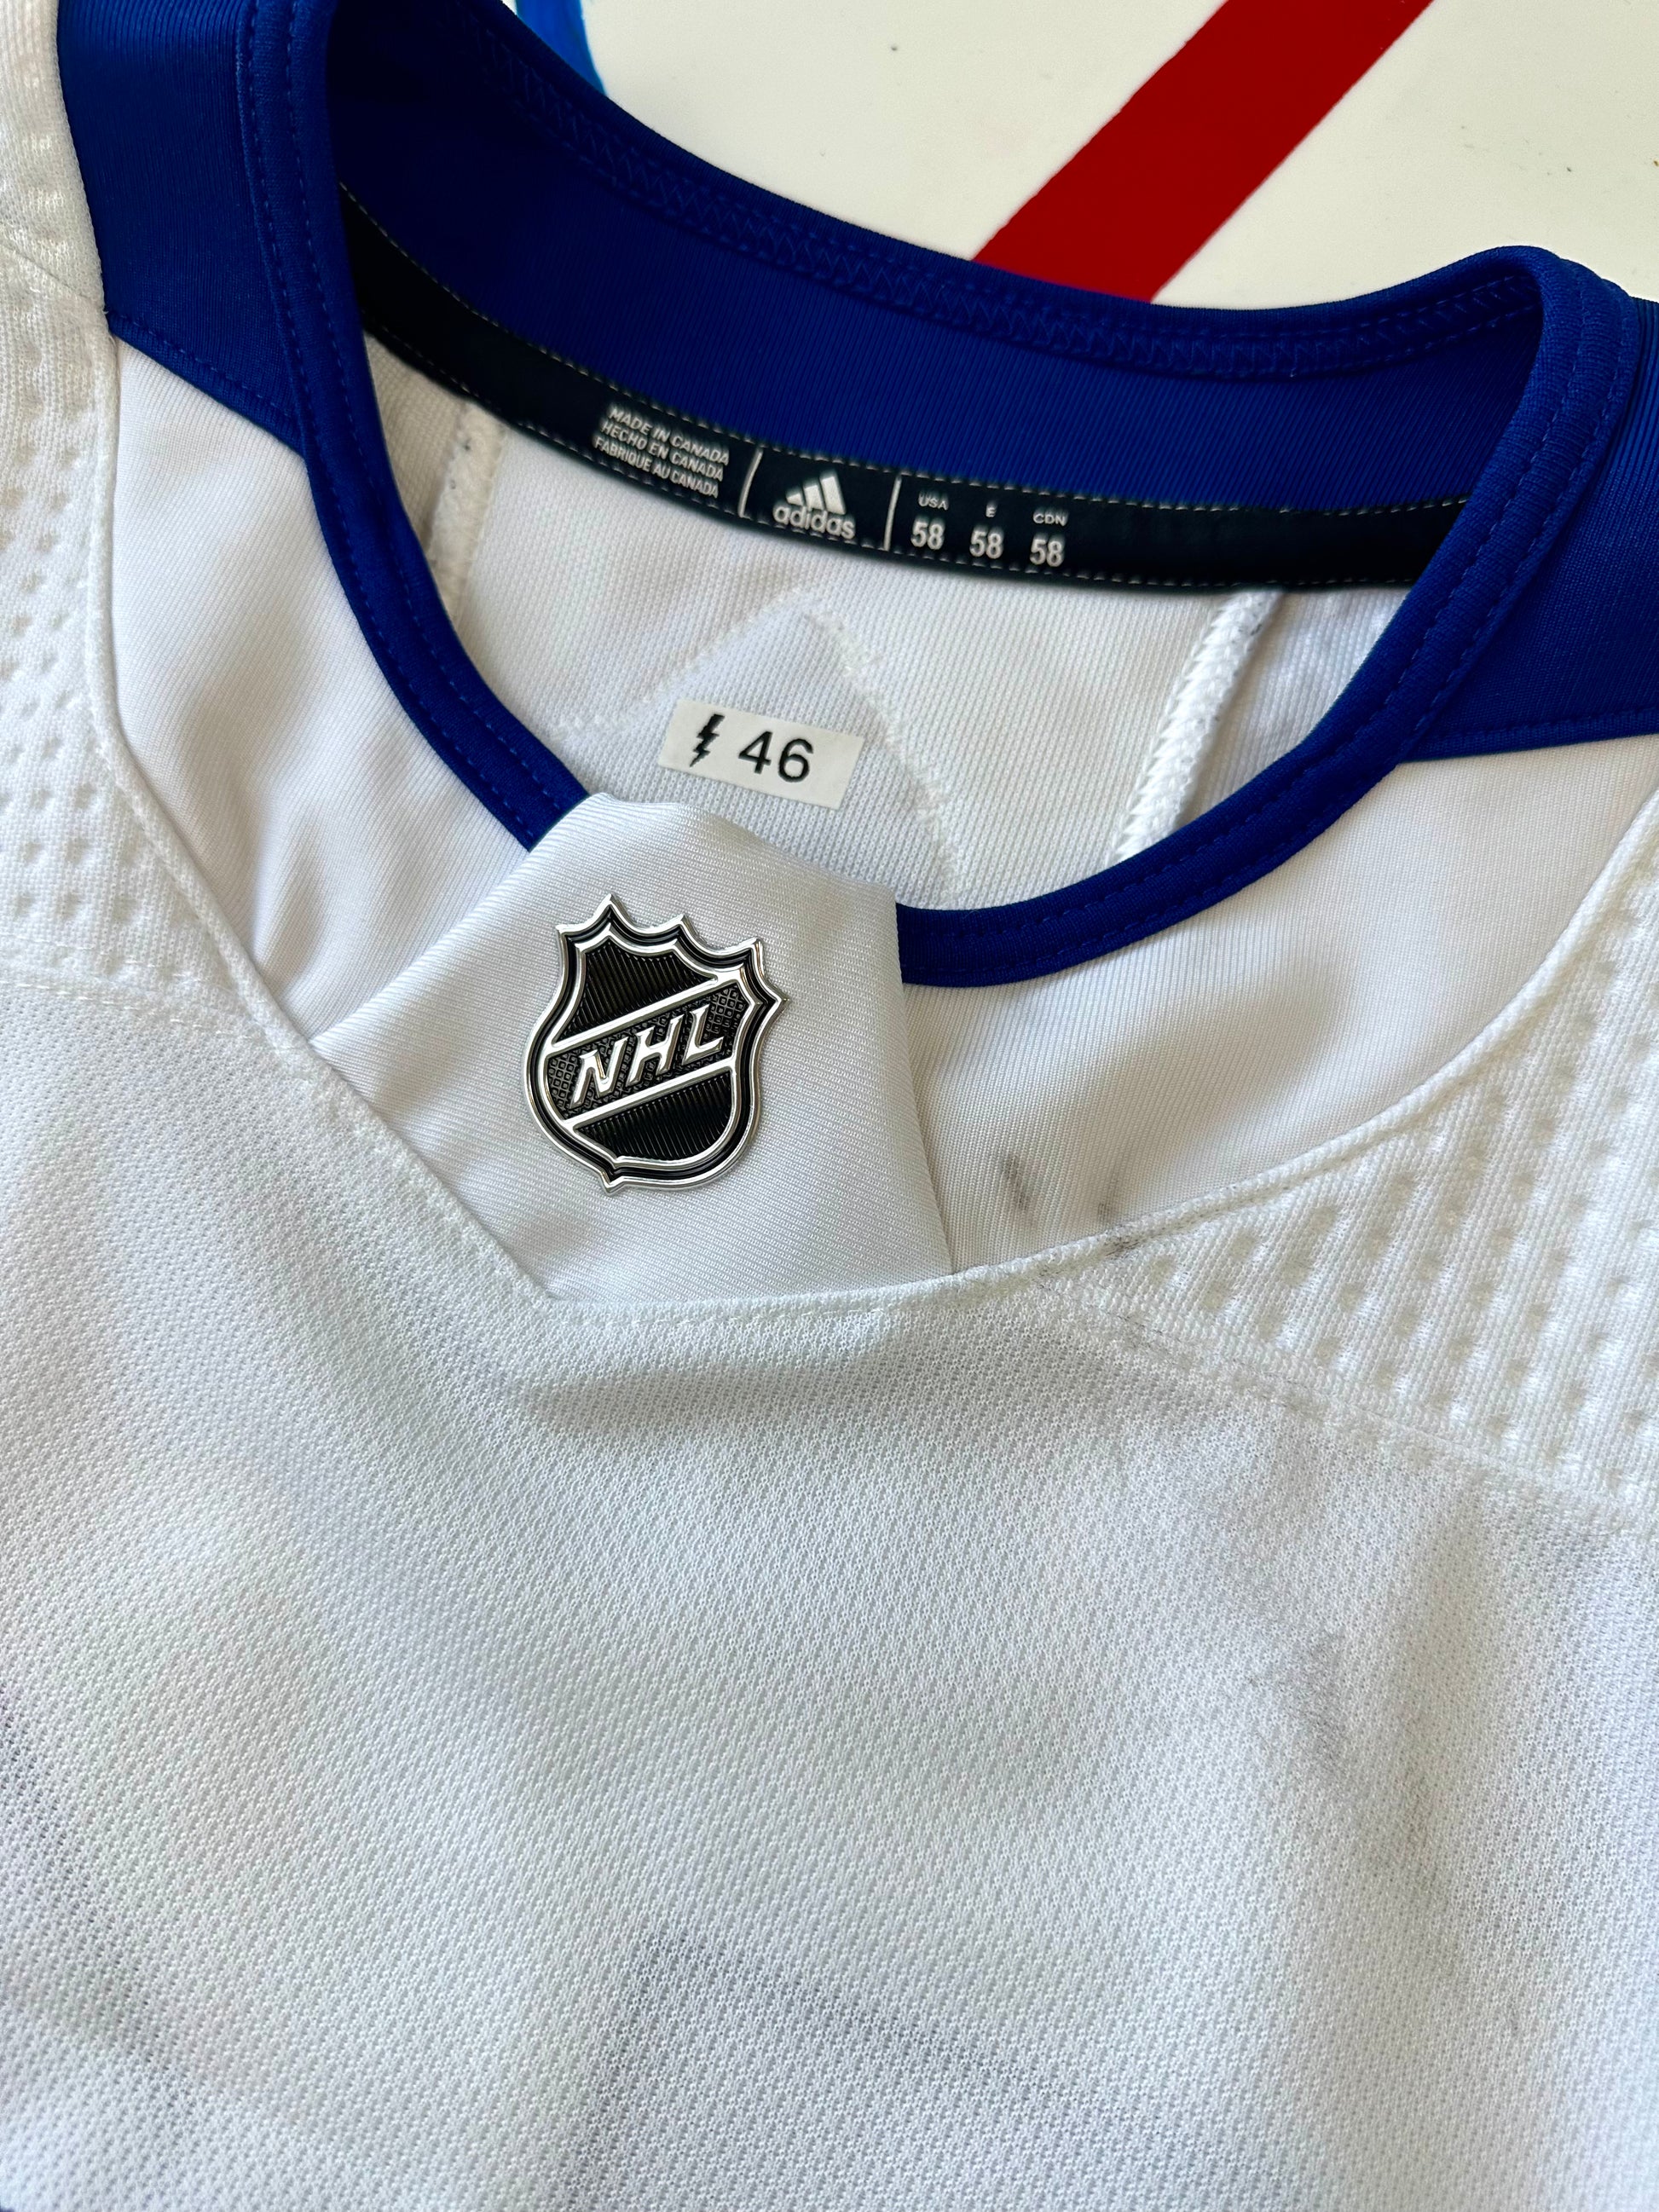 Who had the best-selling NHL jersey during the 2018-19 season?